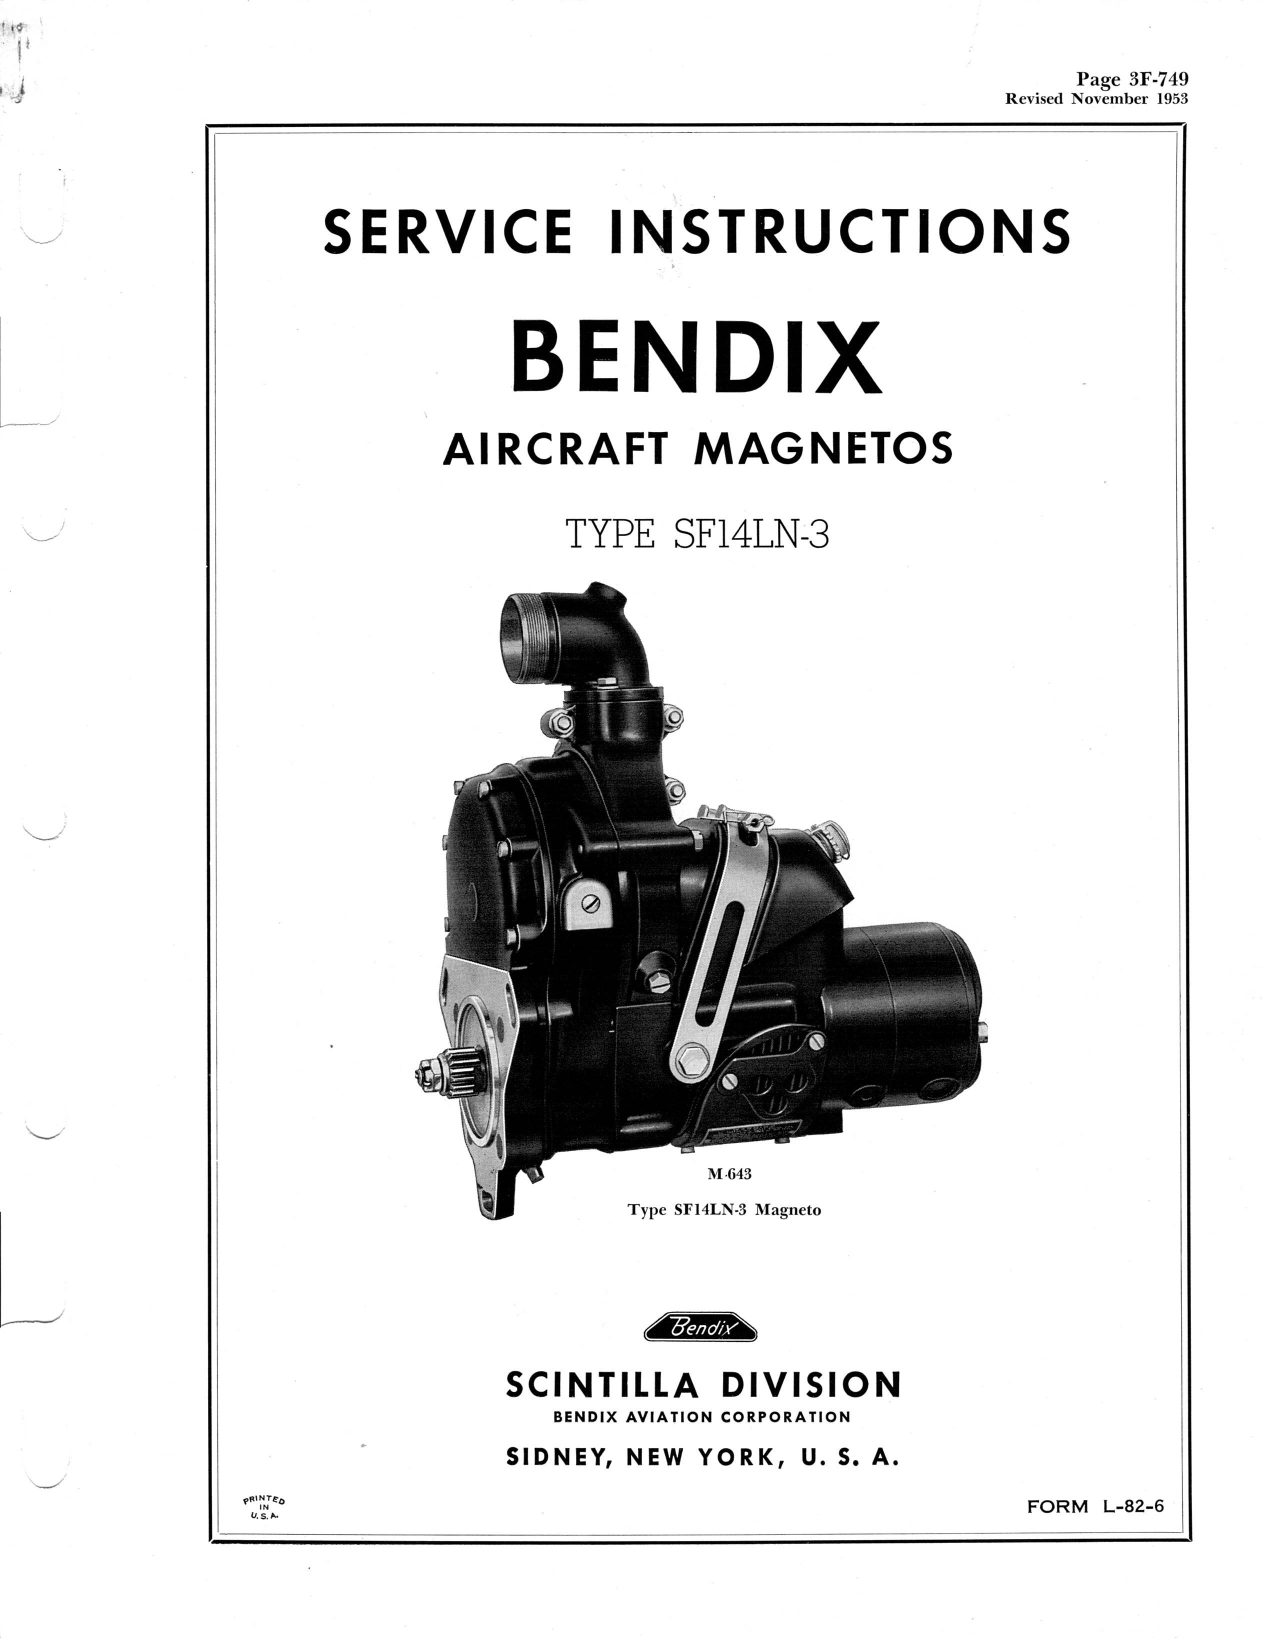 Sample page 1 from AirCorps Library document: Service Instructions for Bendix - Scintilla Magnetos - Type SF14LN-3 